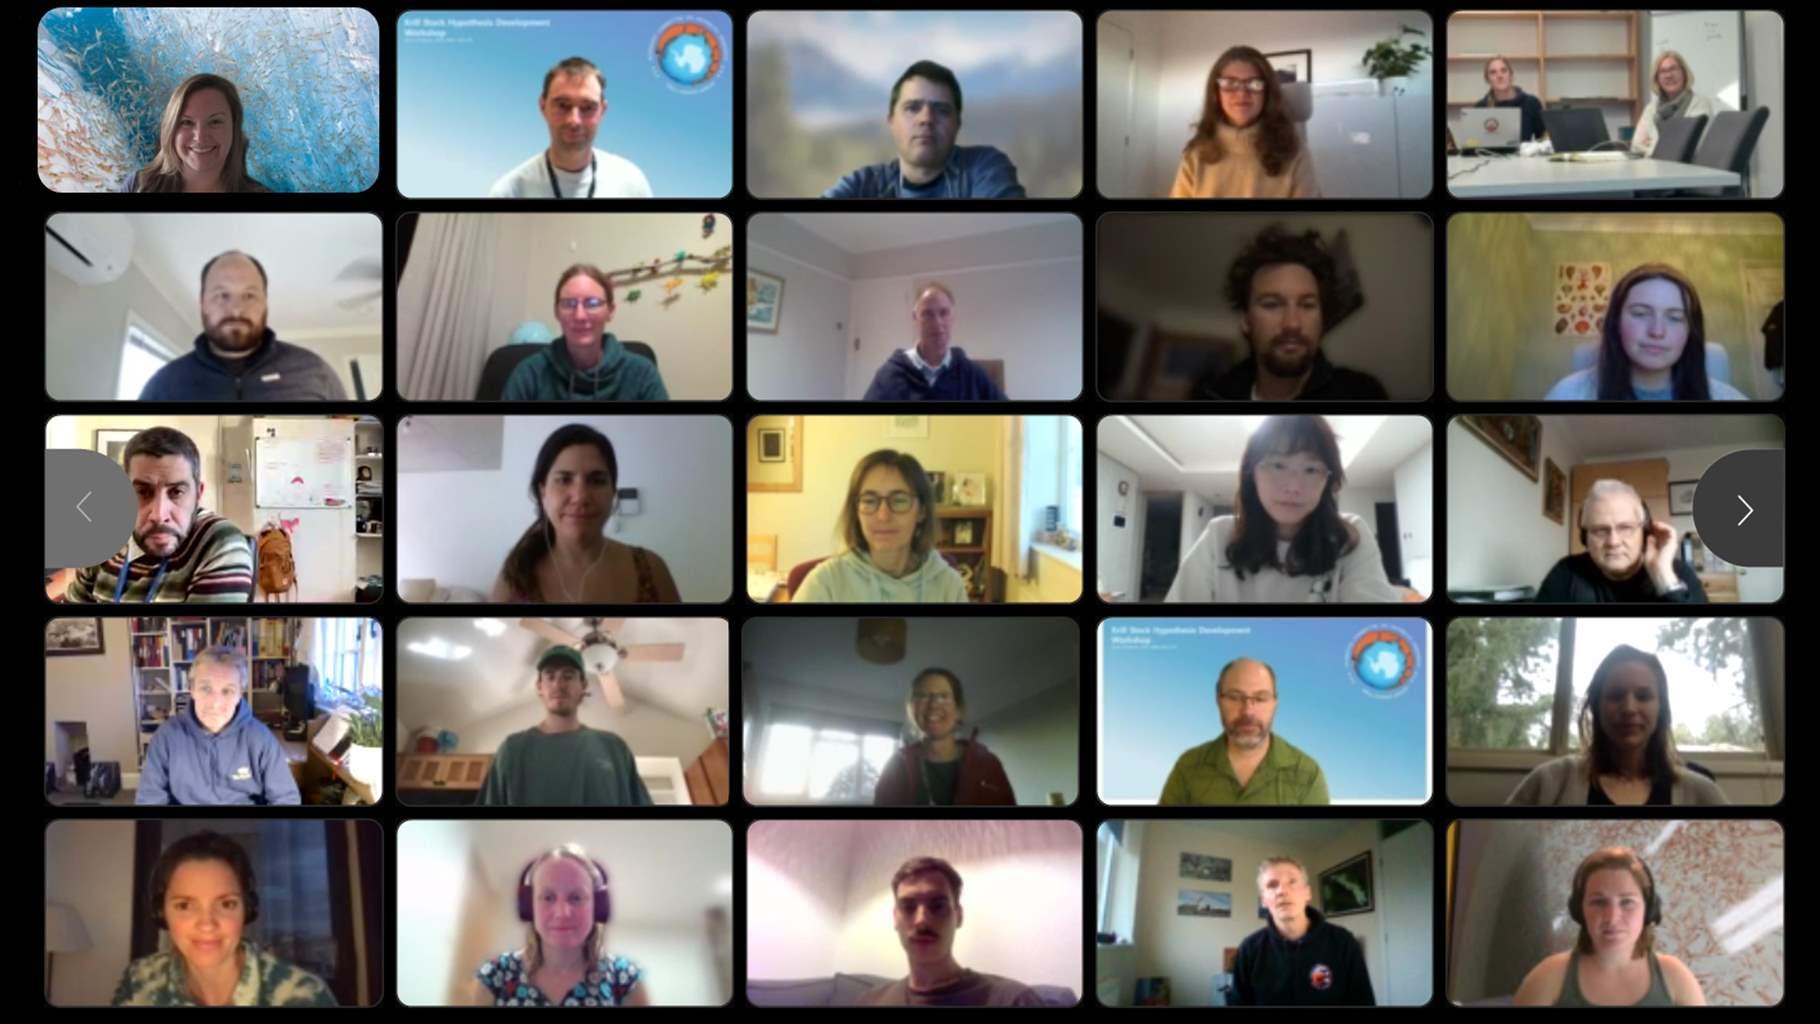  A screenshot of an online meeting shows 25 people.